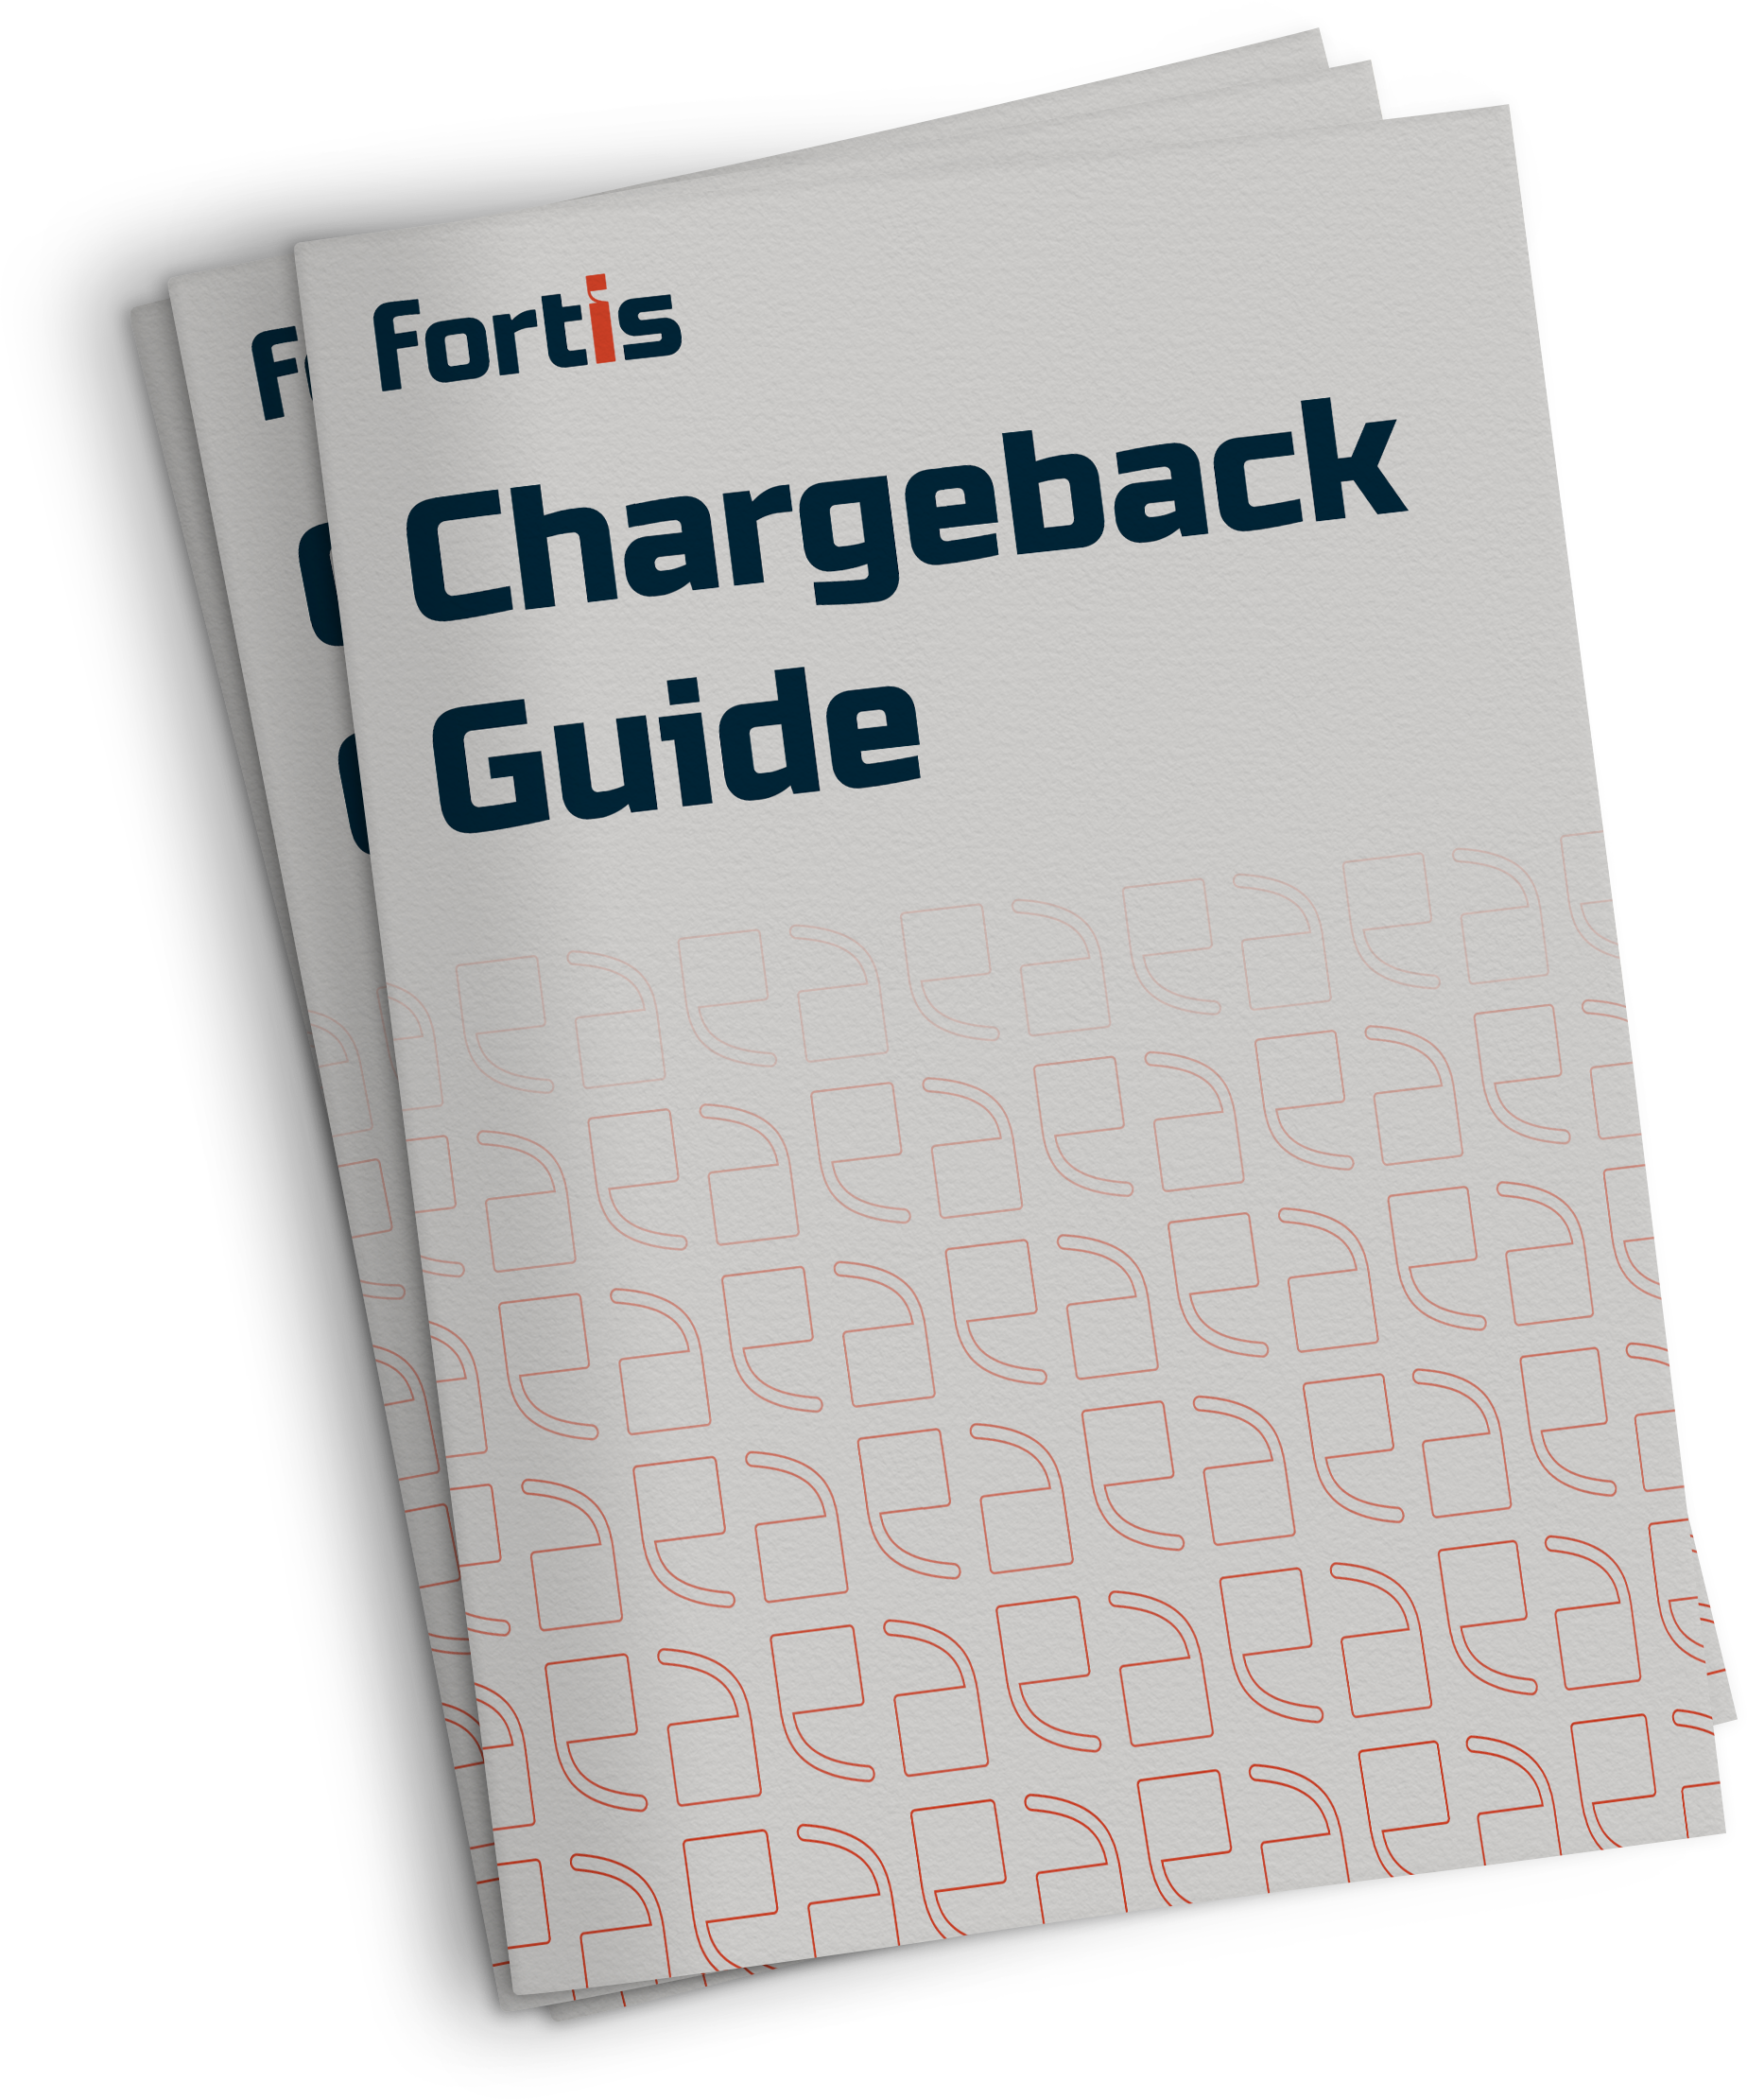 Chargeback Guide Cover mockup 3